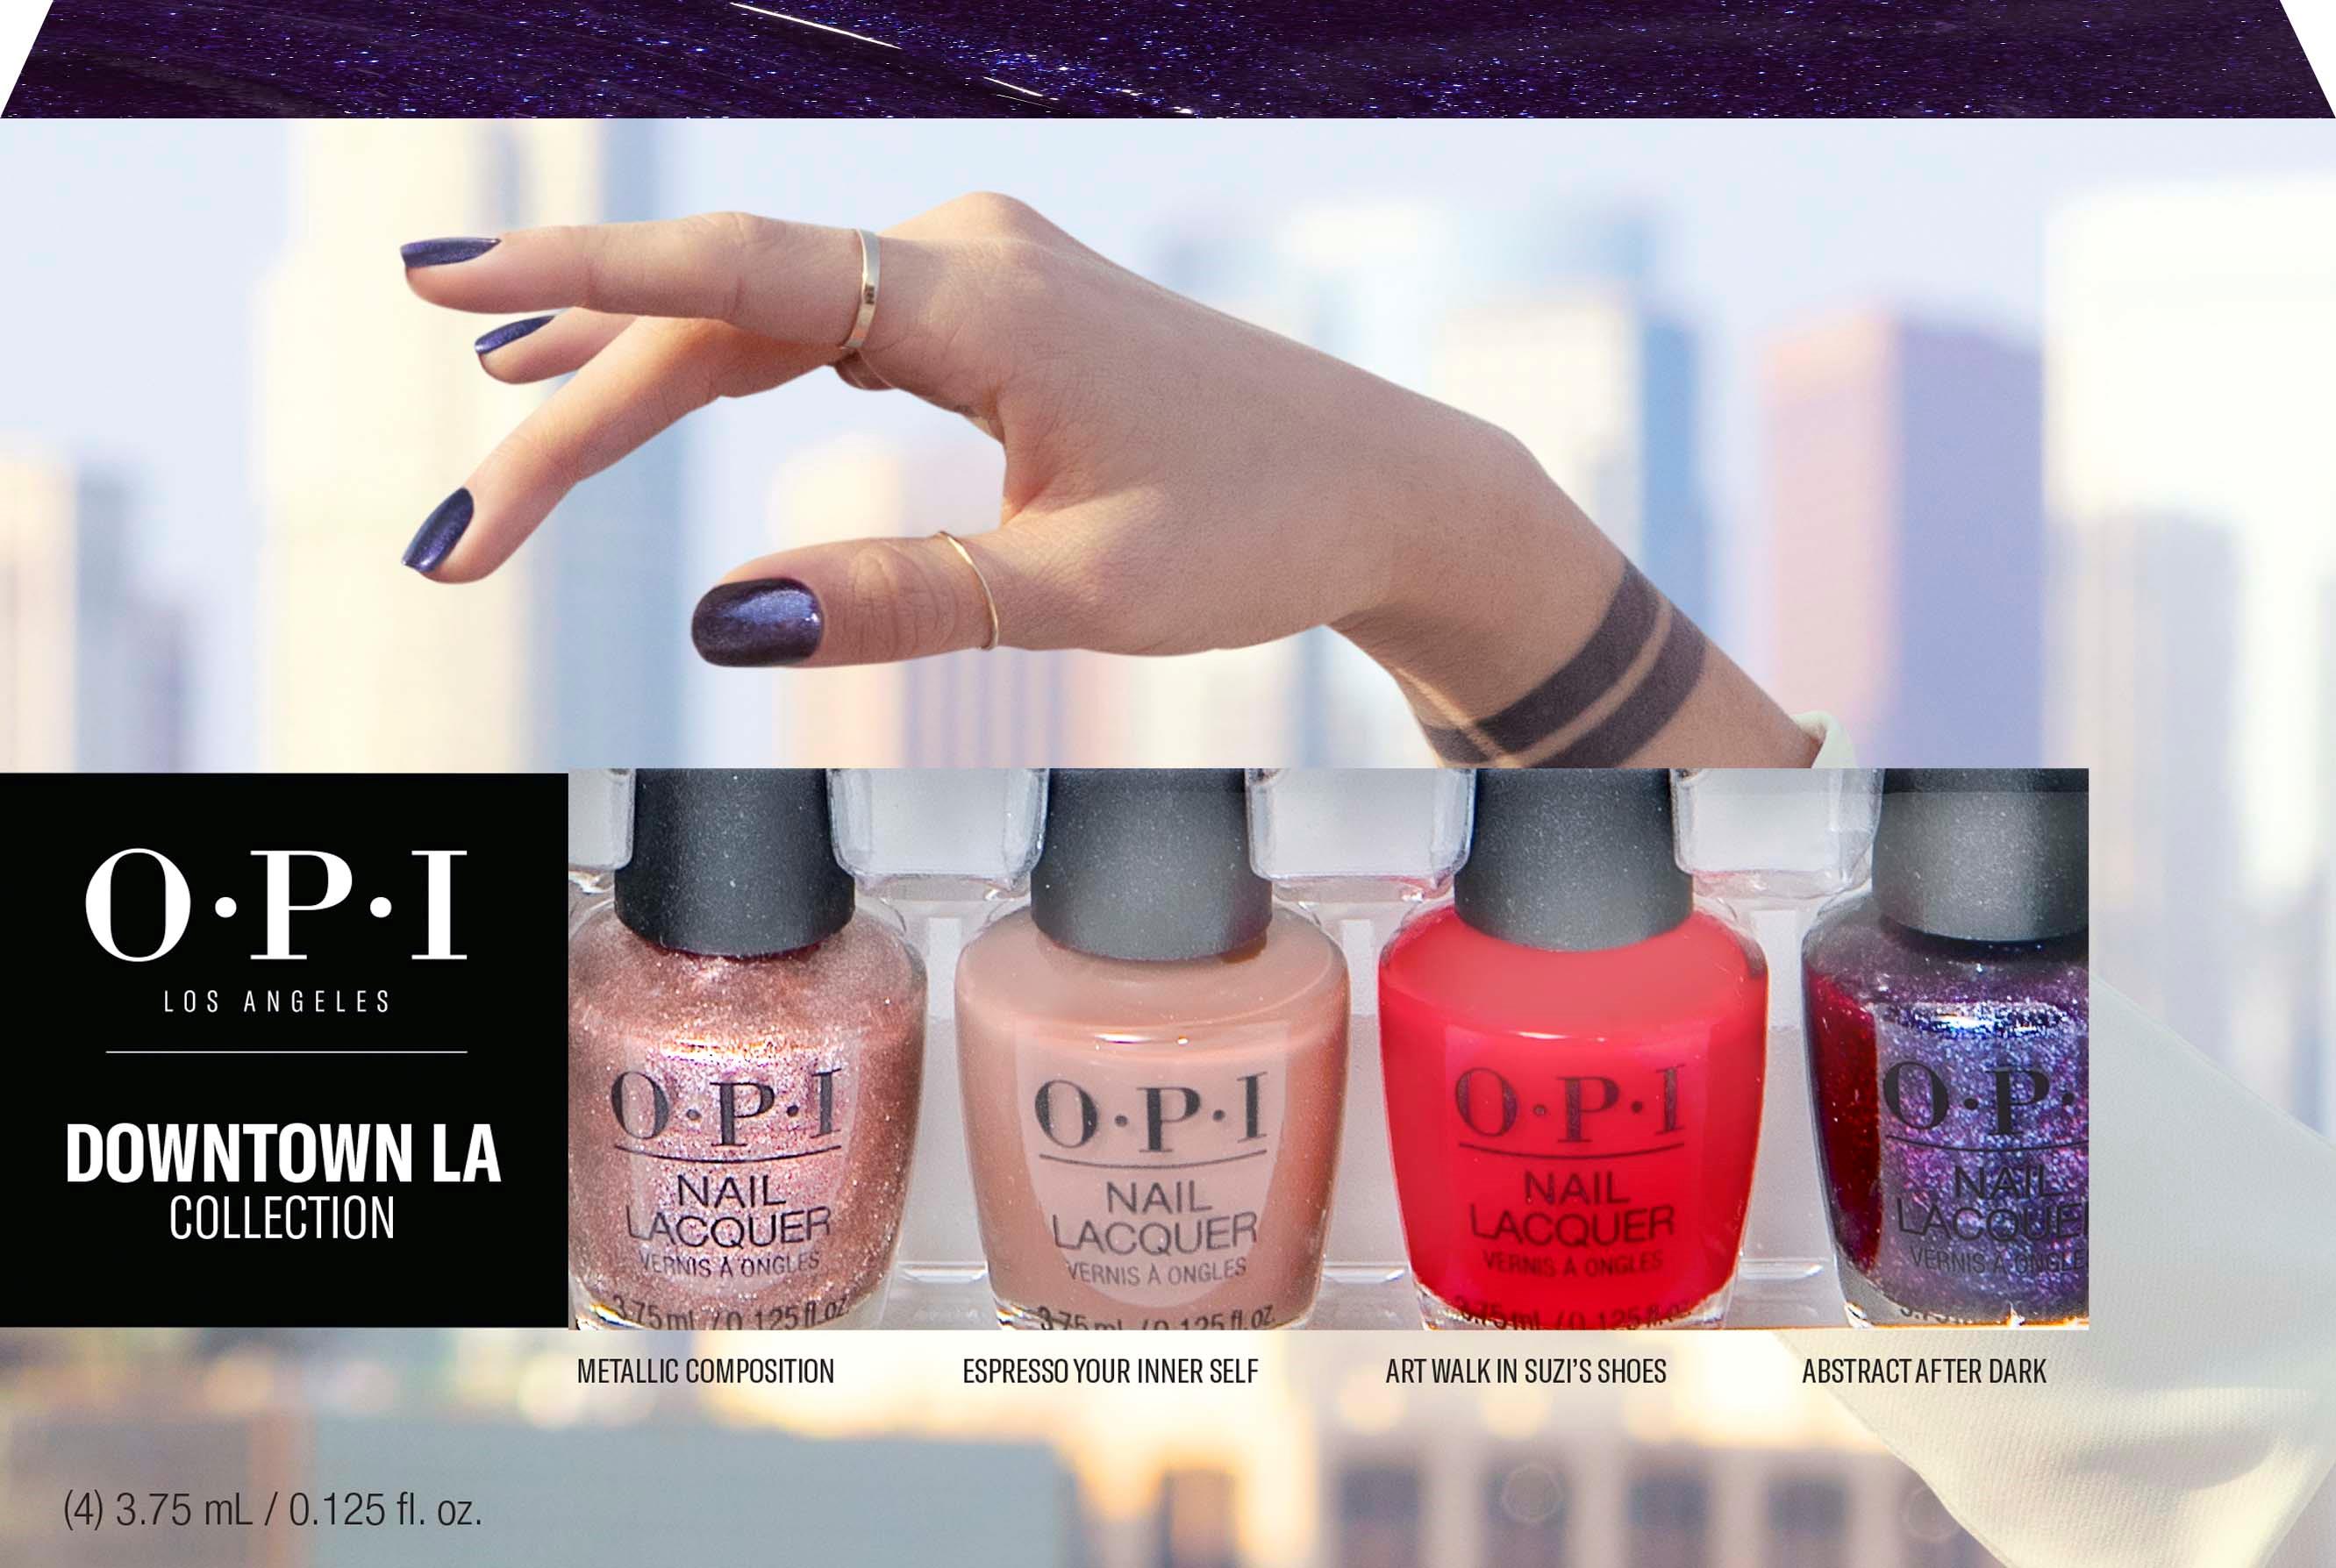 OPI Nail Lacquer, Dock & Bay - wide 3